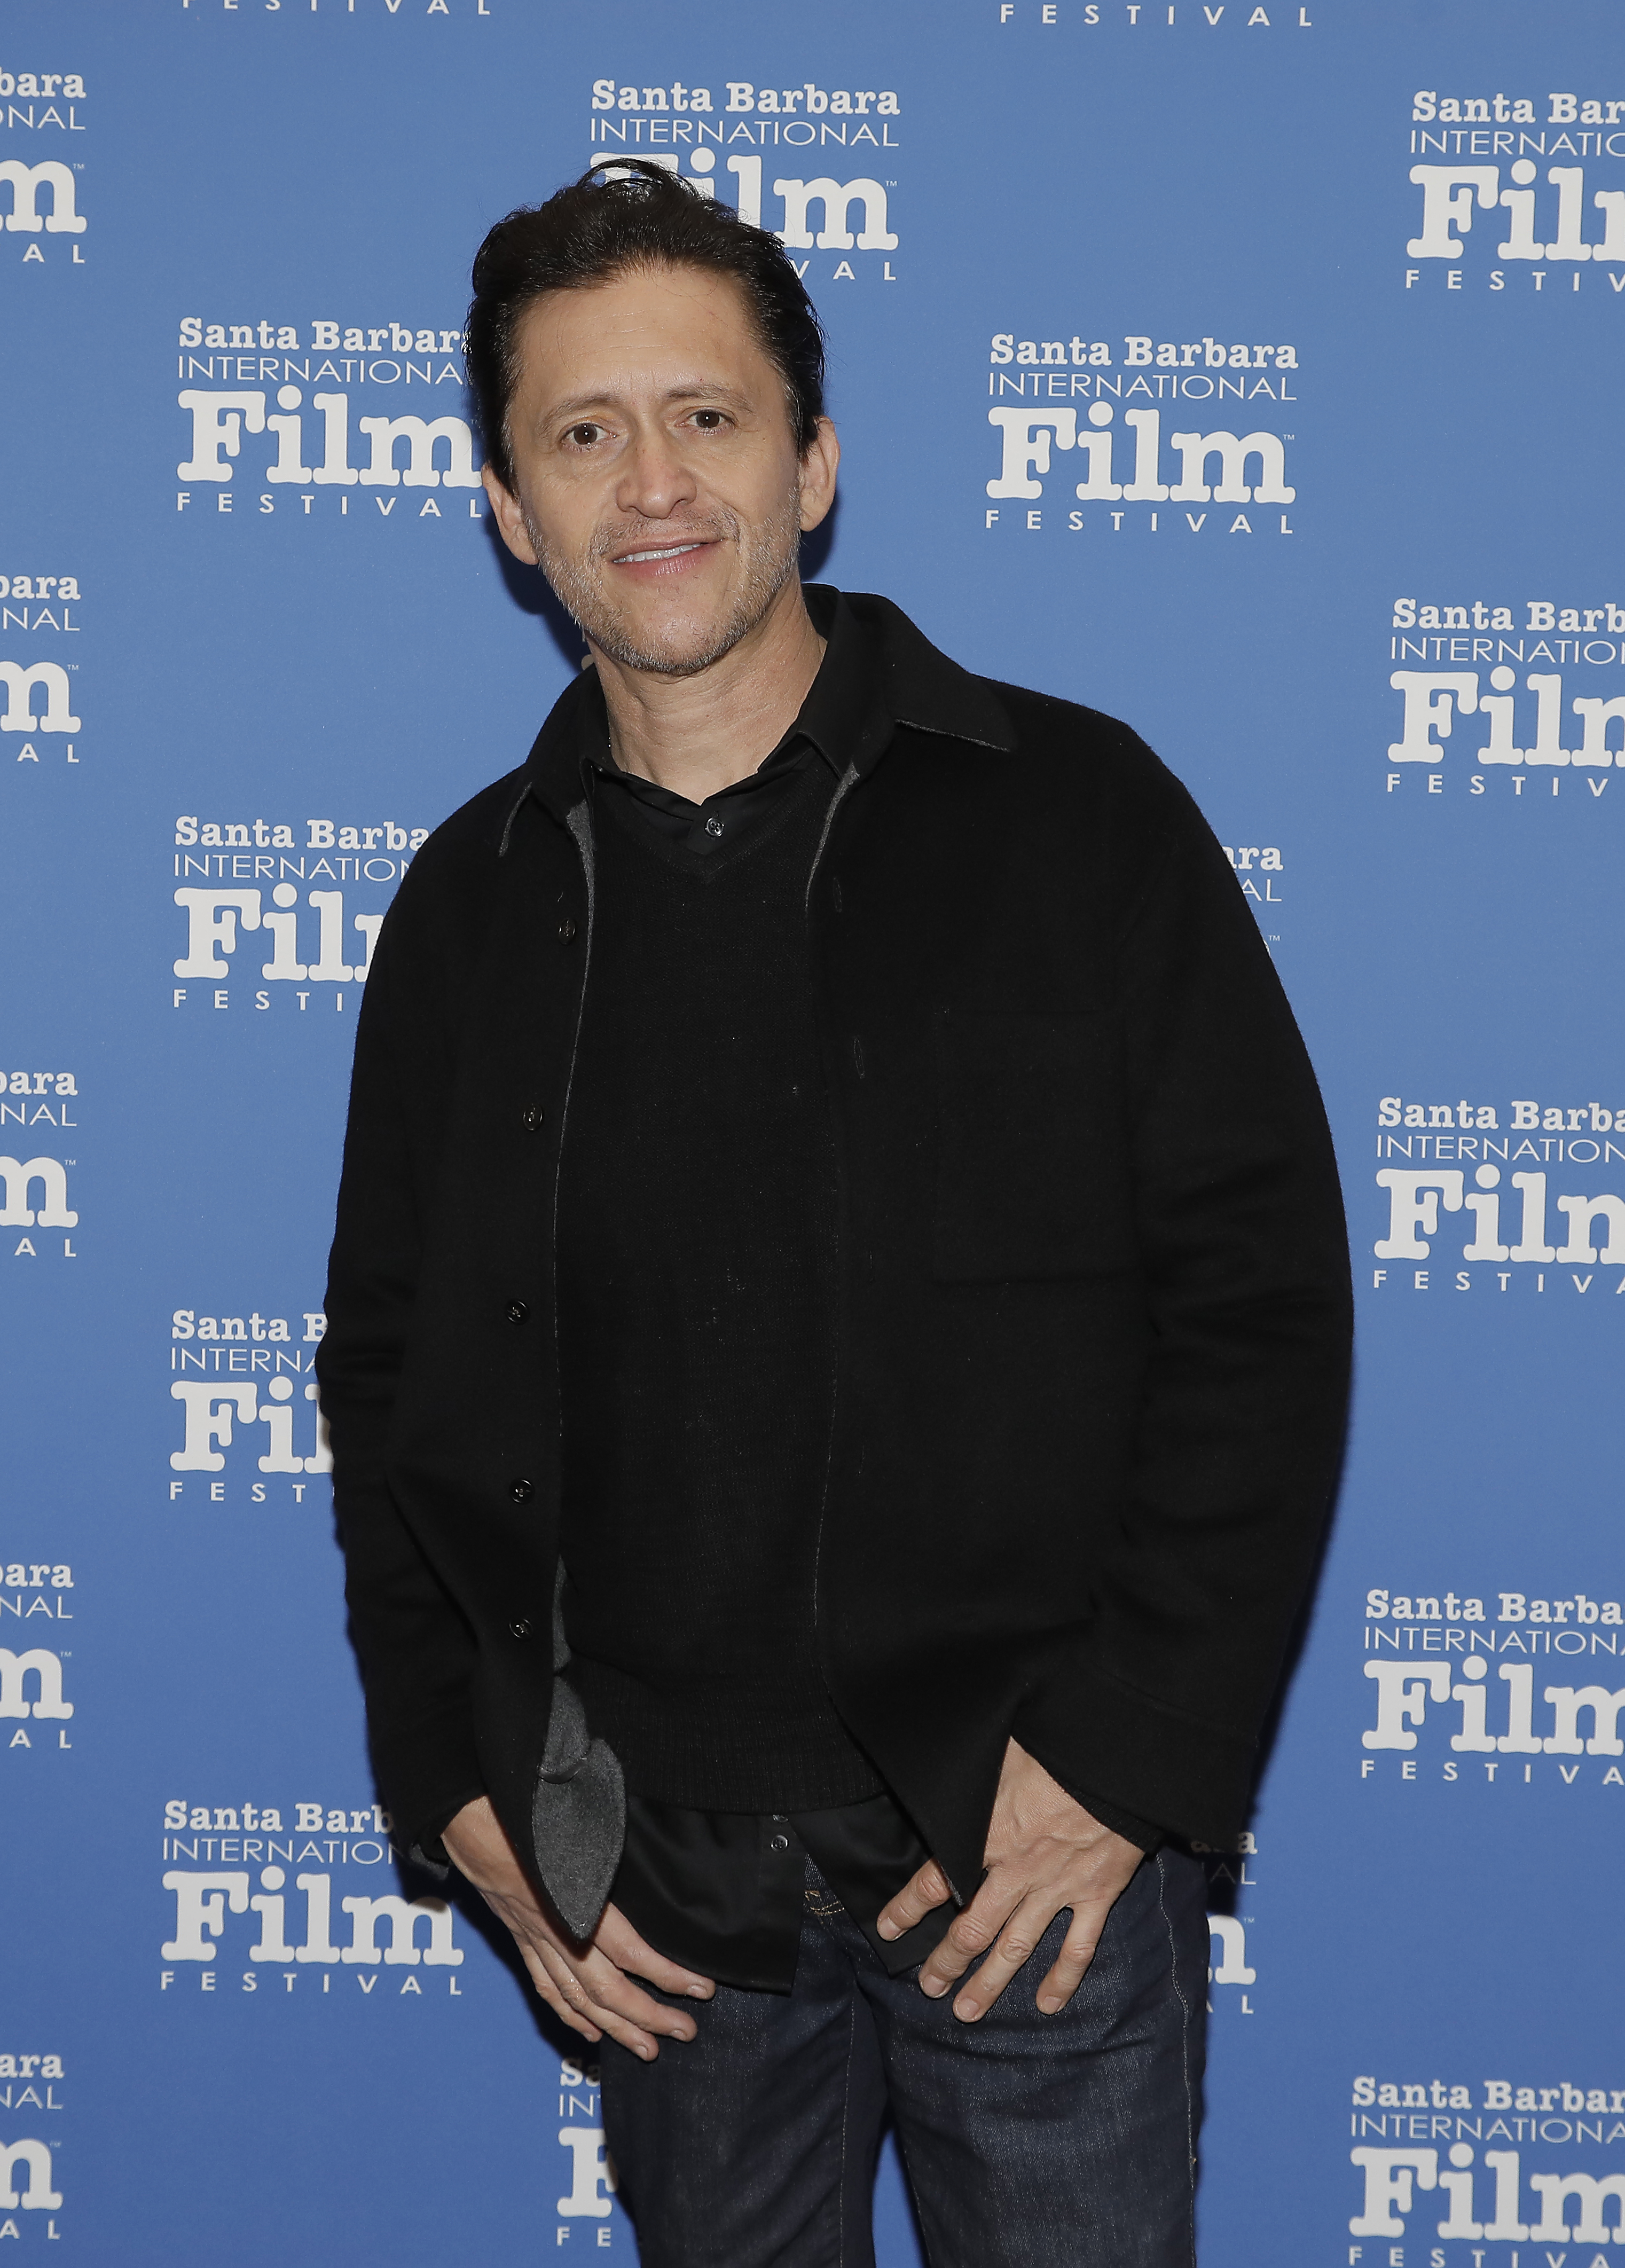 Clifton Collins Jr. stands on the Santa Barbara International Film Festival red carpet in a casual jacket and shirt